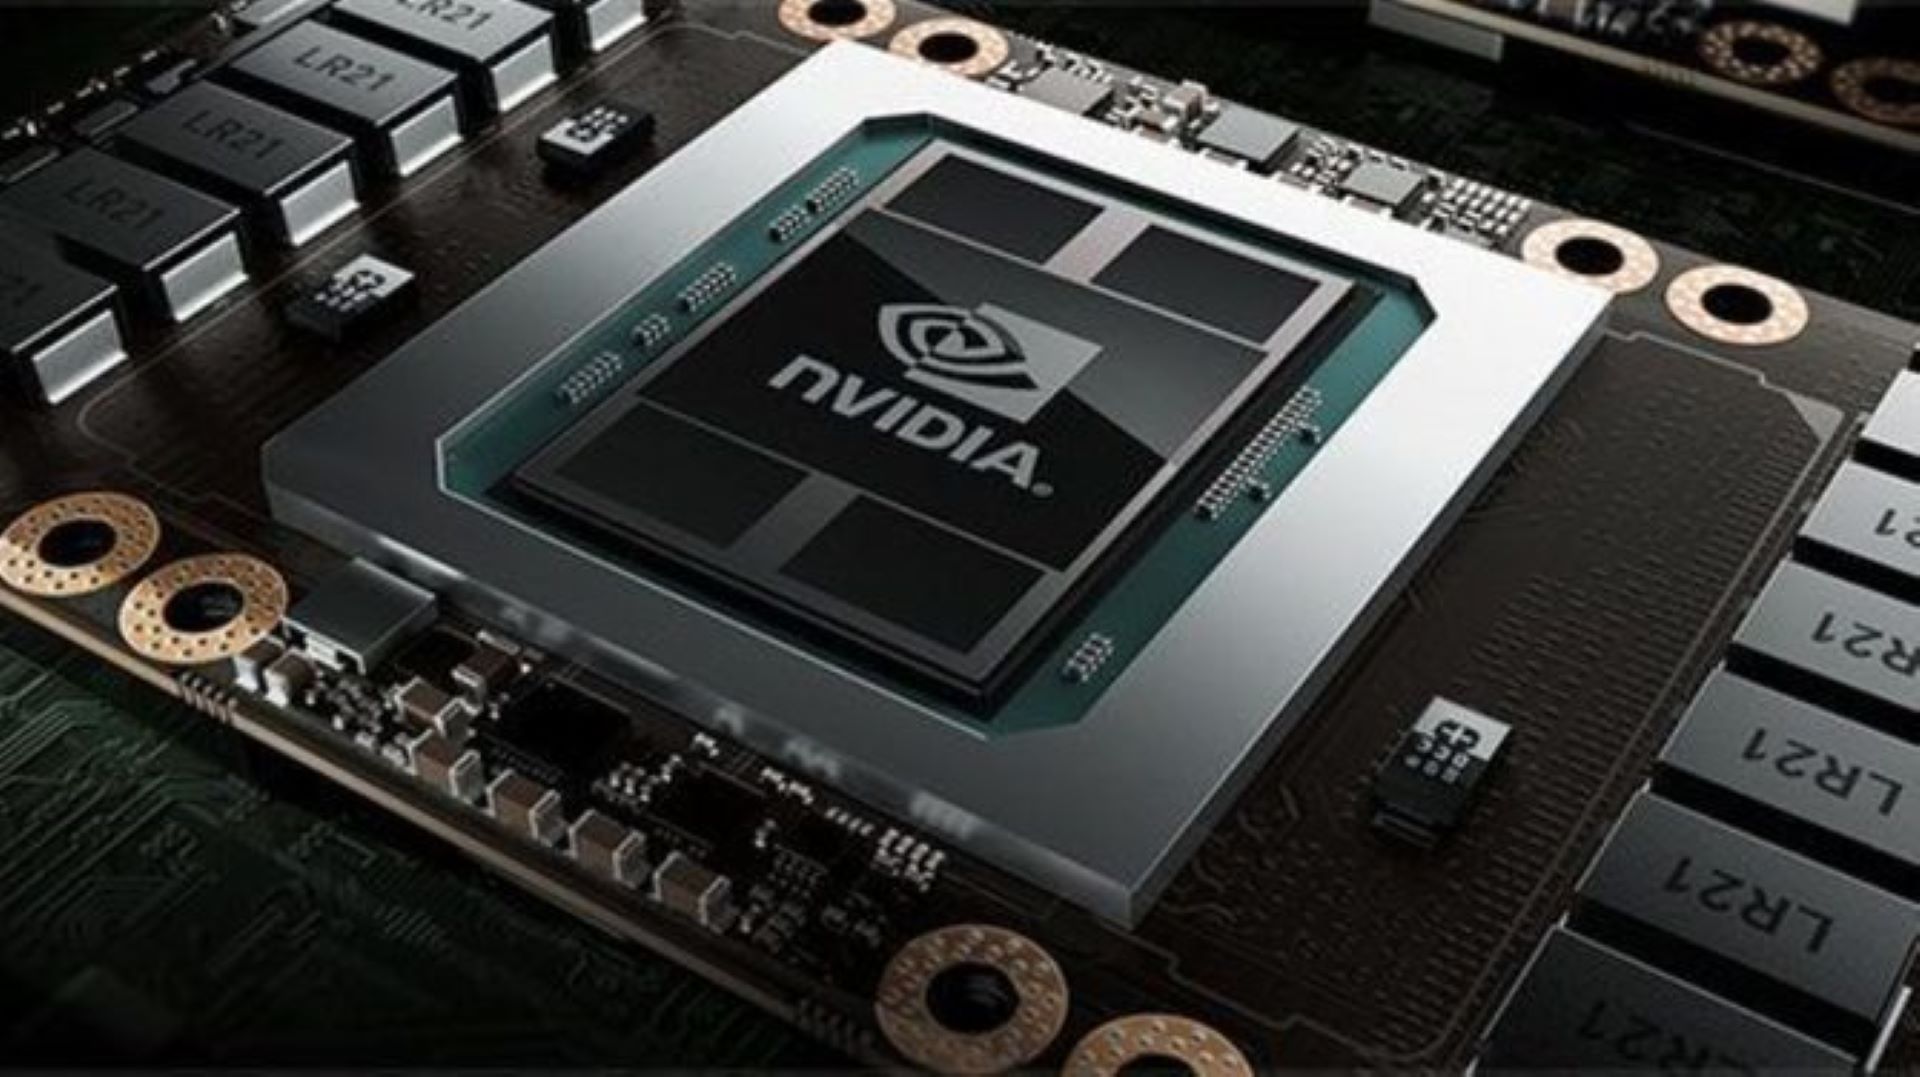 Alleged specifications of Nvidia RTX 4090, 4080, 4070 and 4060 Ada Lovelace  leak - Neowin